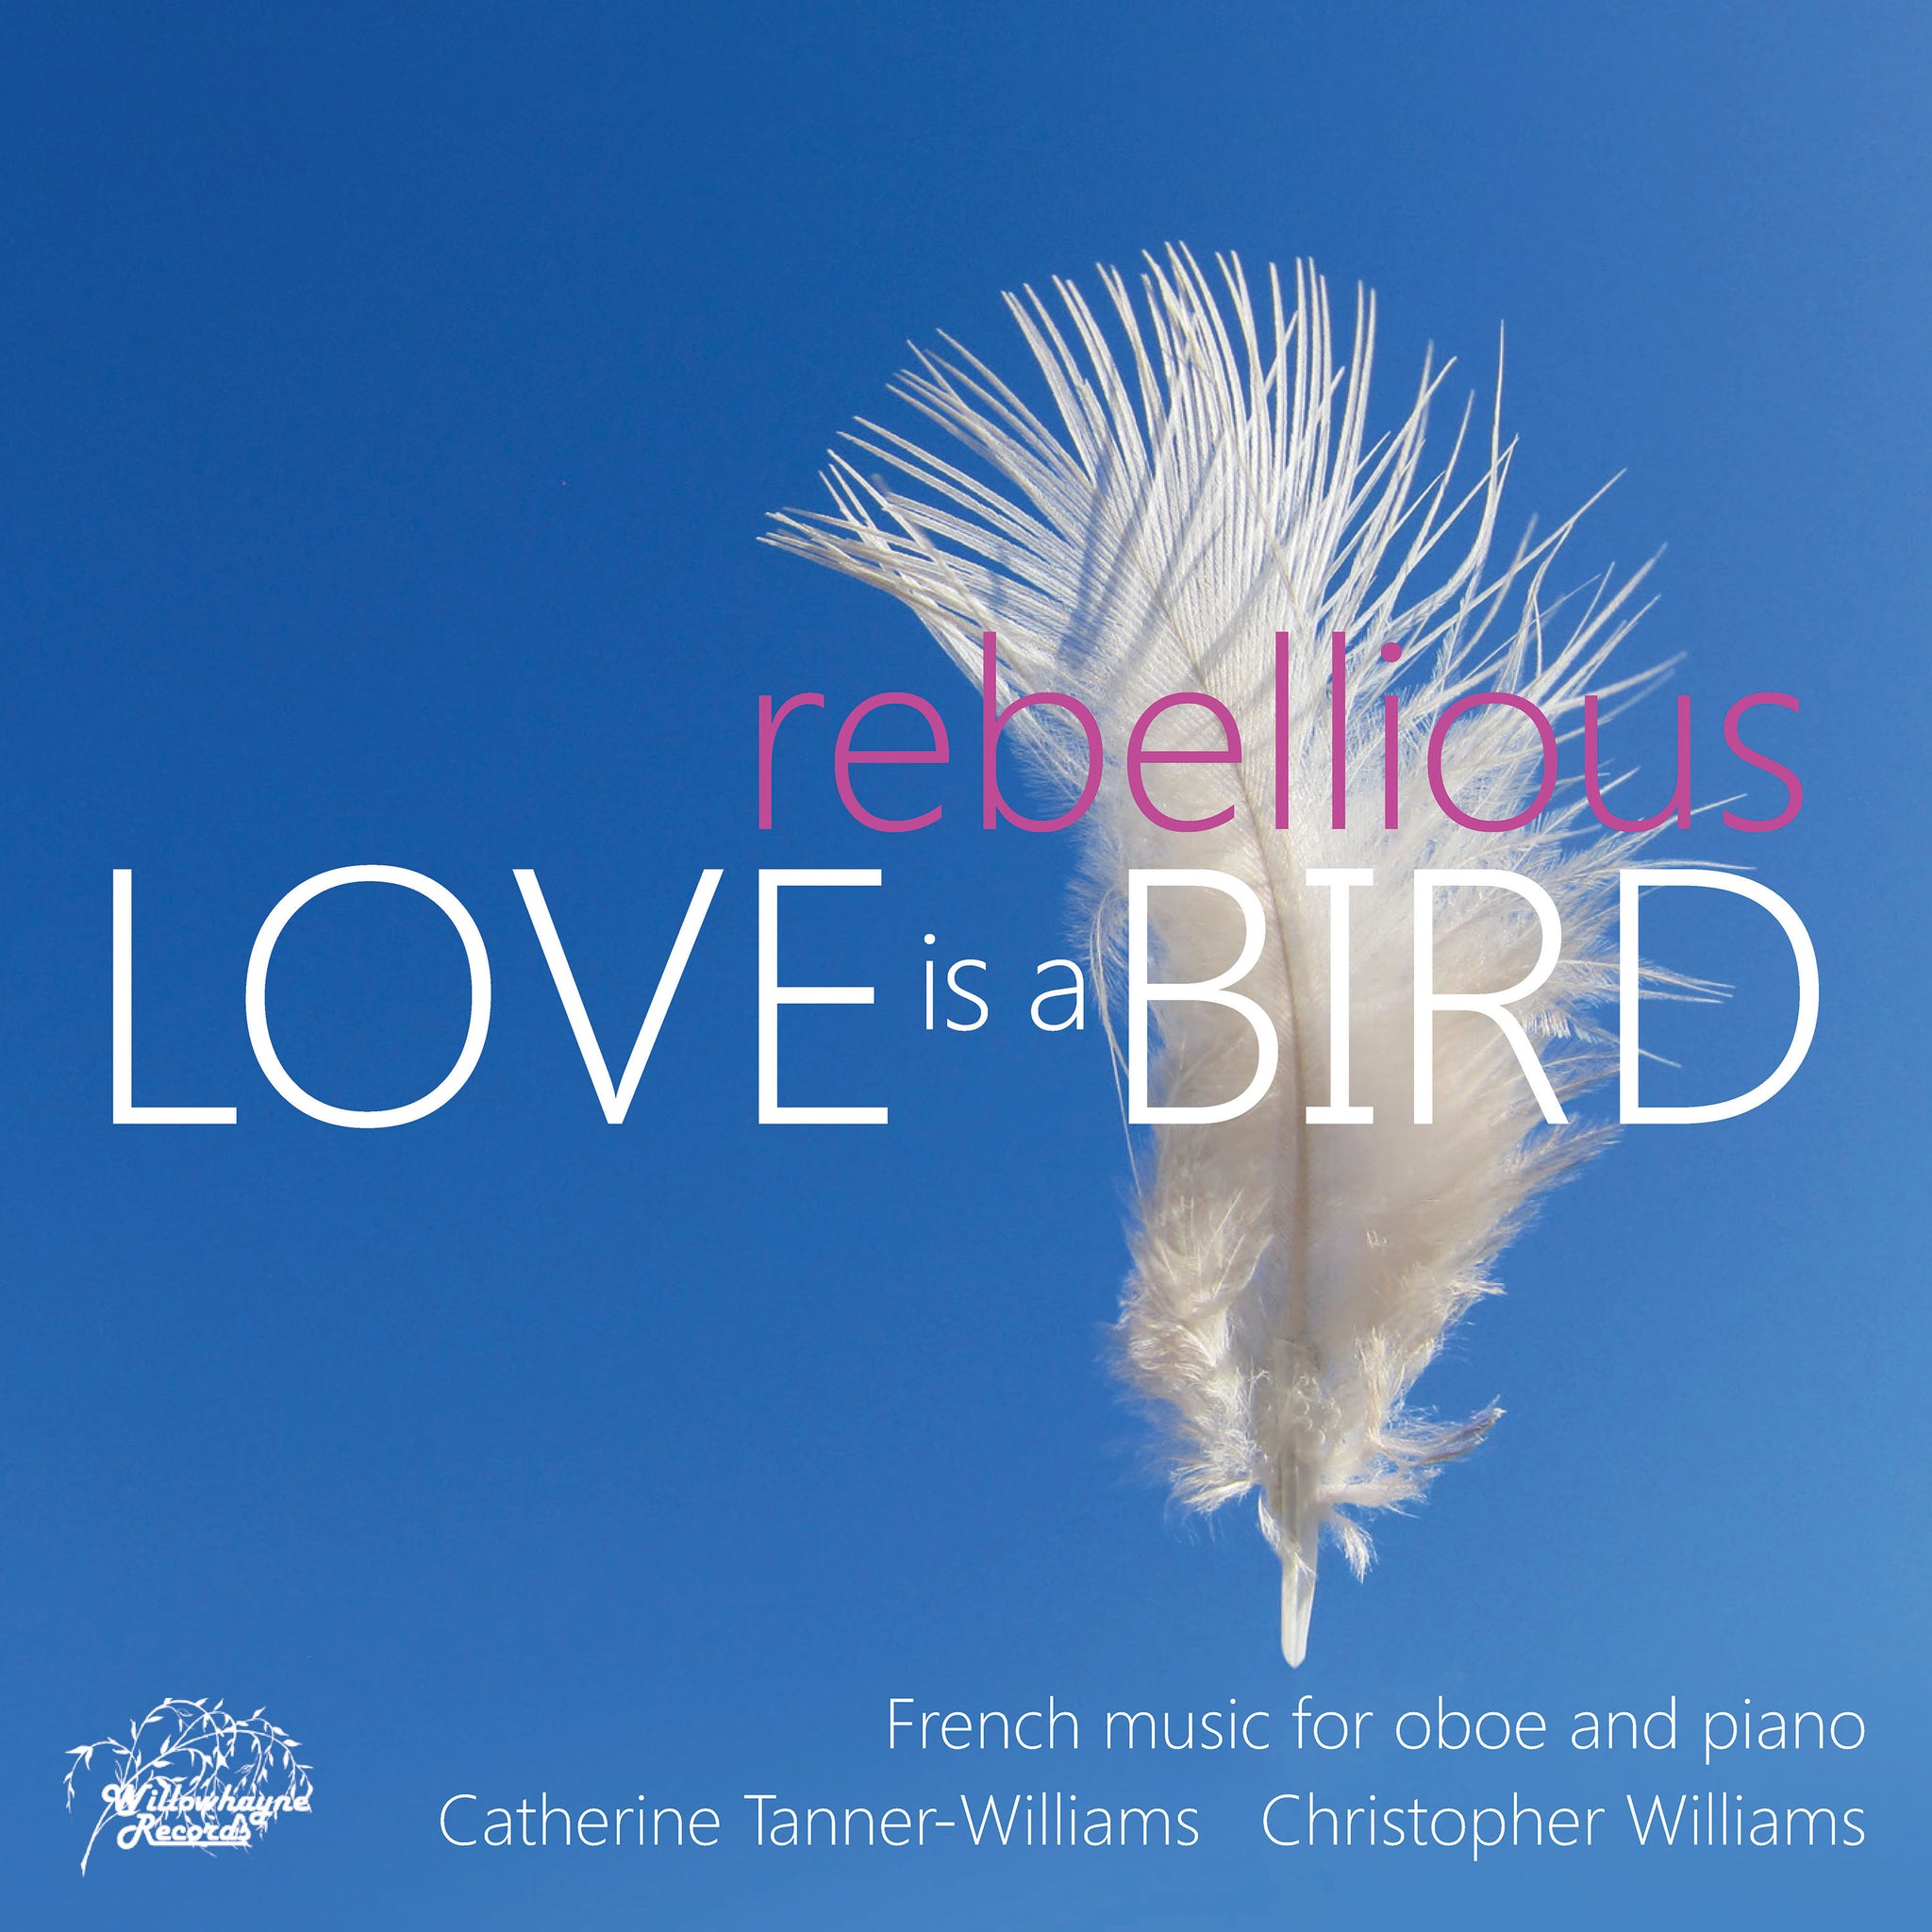 Love is a Rebellious Bird - Music for Oboe & Piano / Tanner-Williams, Williams